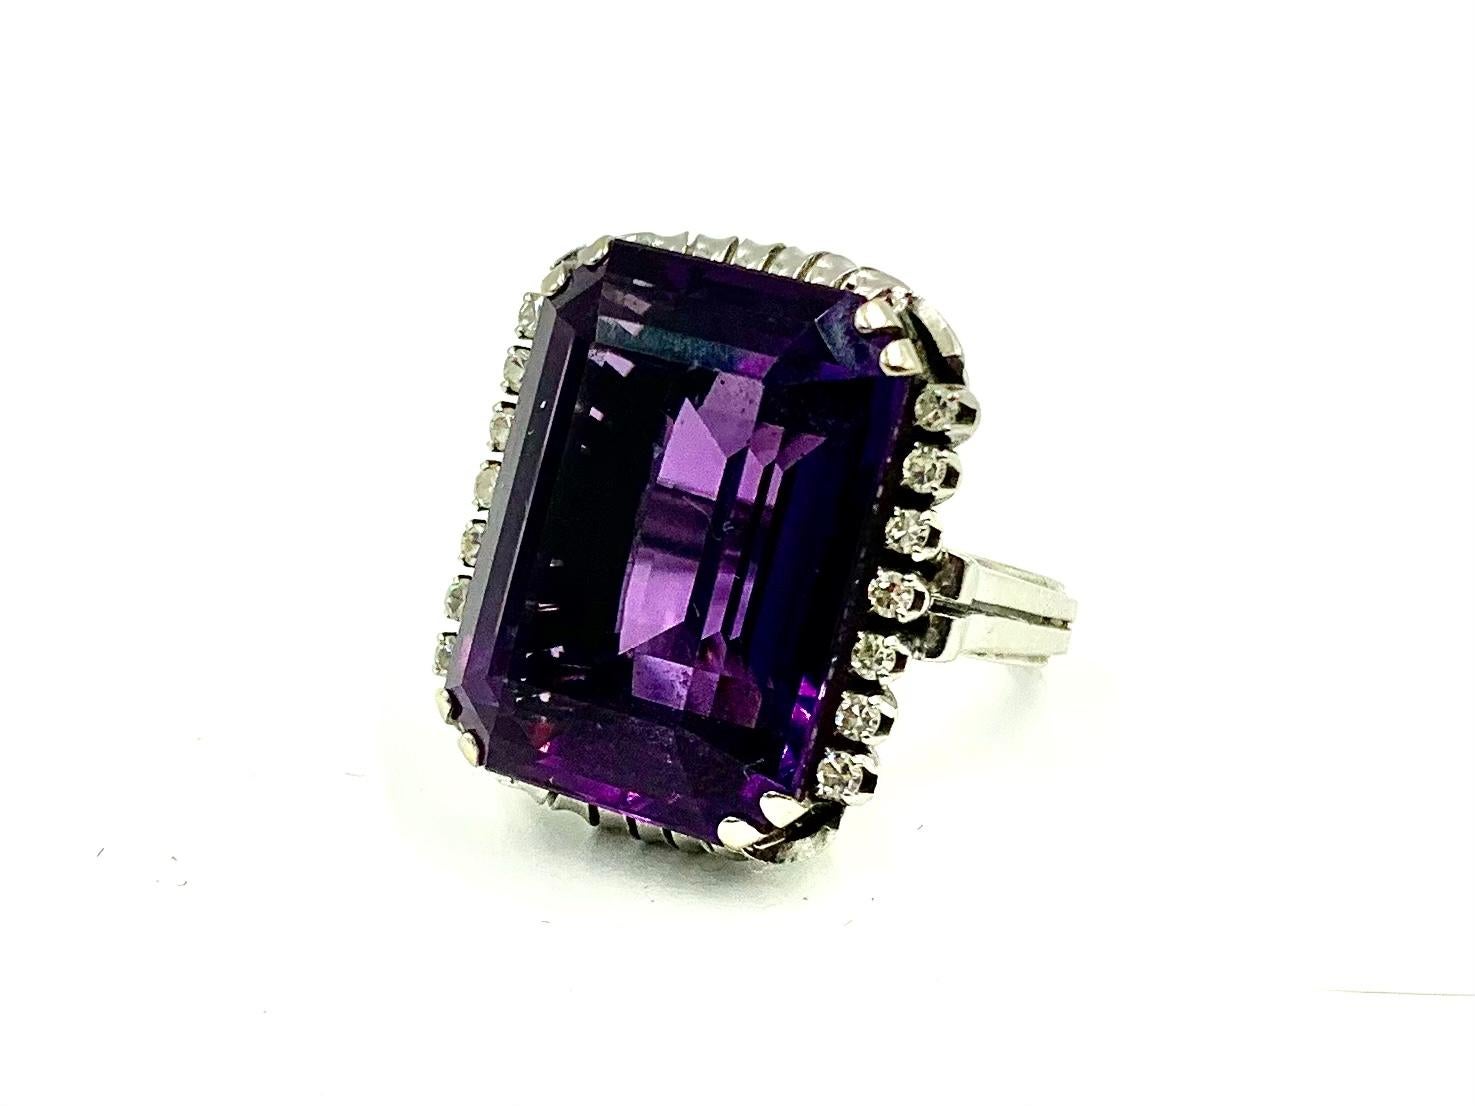 Fine, large Art Deco period Amethyst and Diamond ring in a beautifully detailed 18K white gold setting.
Early 20th Century
The amethyst, measuring approximately 22.5 carats, lively rich purple color.
14 single cut diamonds, seven on each side of the